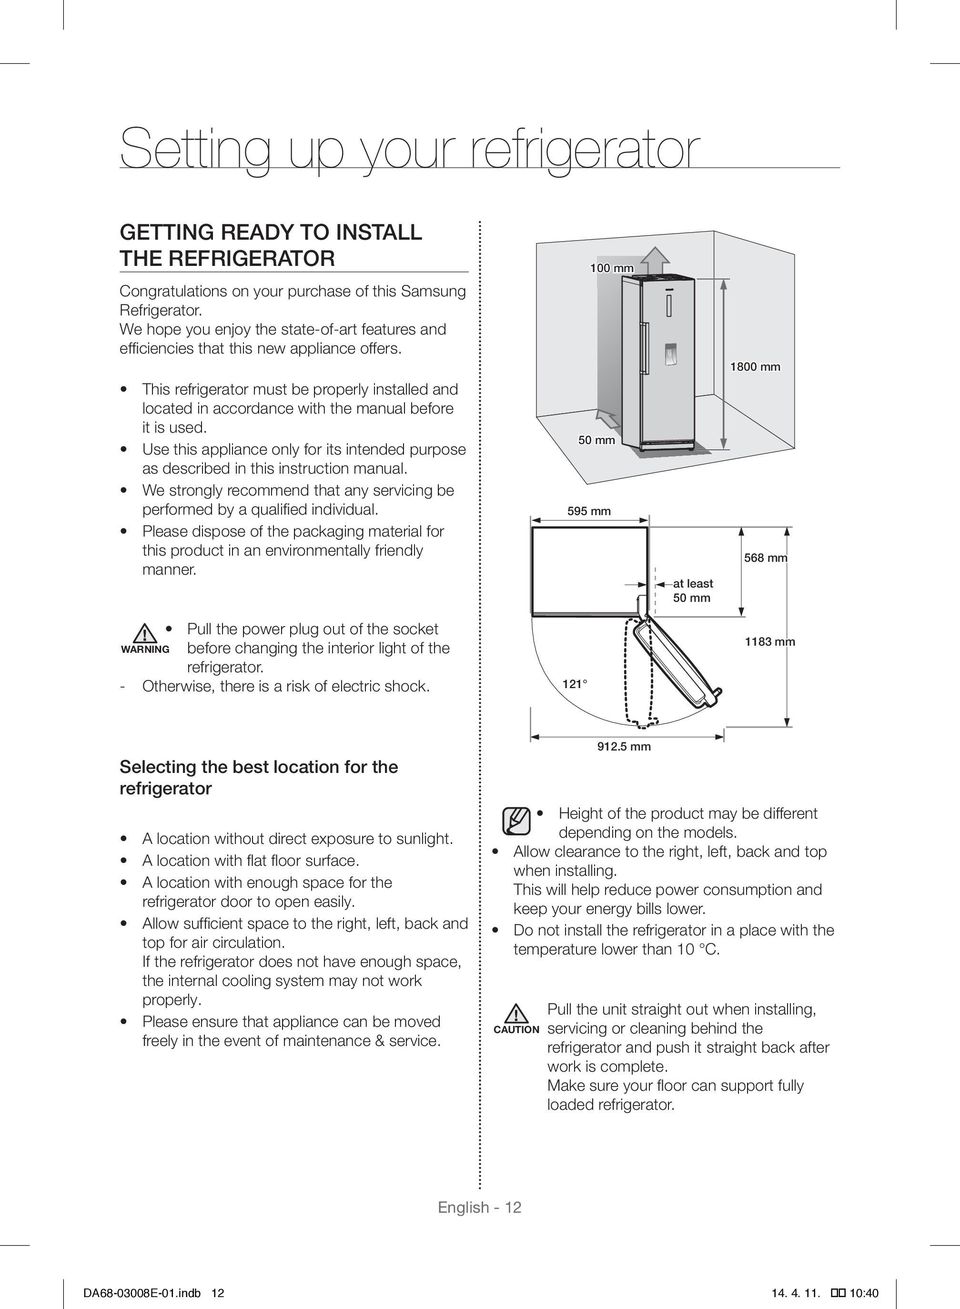 Use this appliance only for its intended purpose as described in this instruction manual. We strongly recommend that any servicing be performed by a qualified individual.